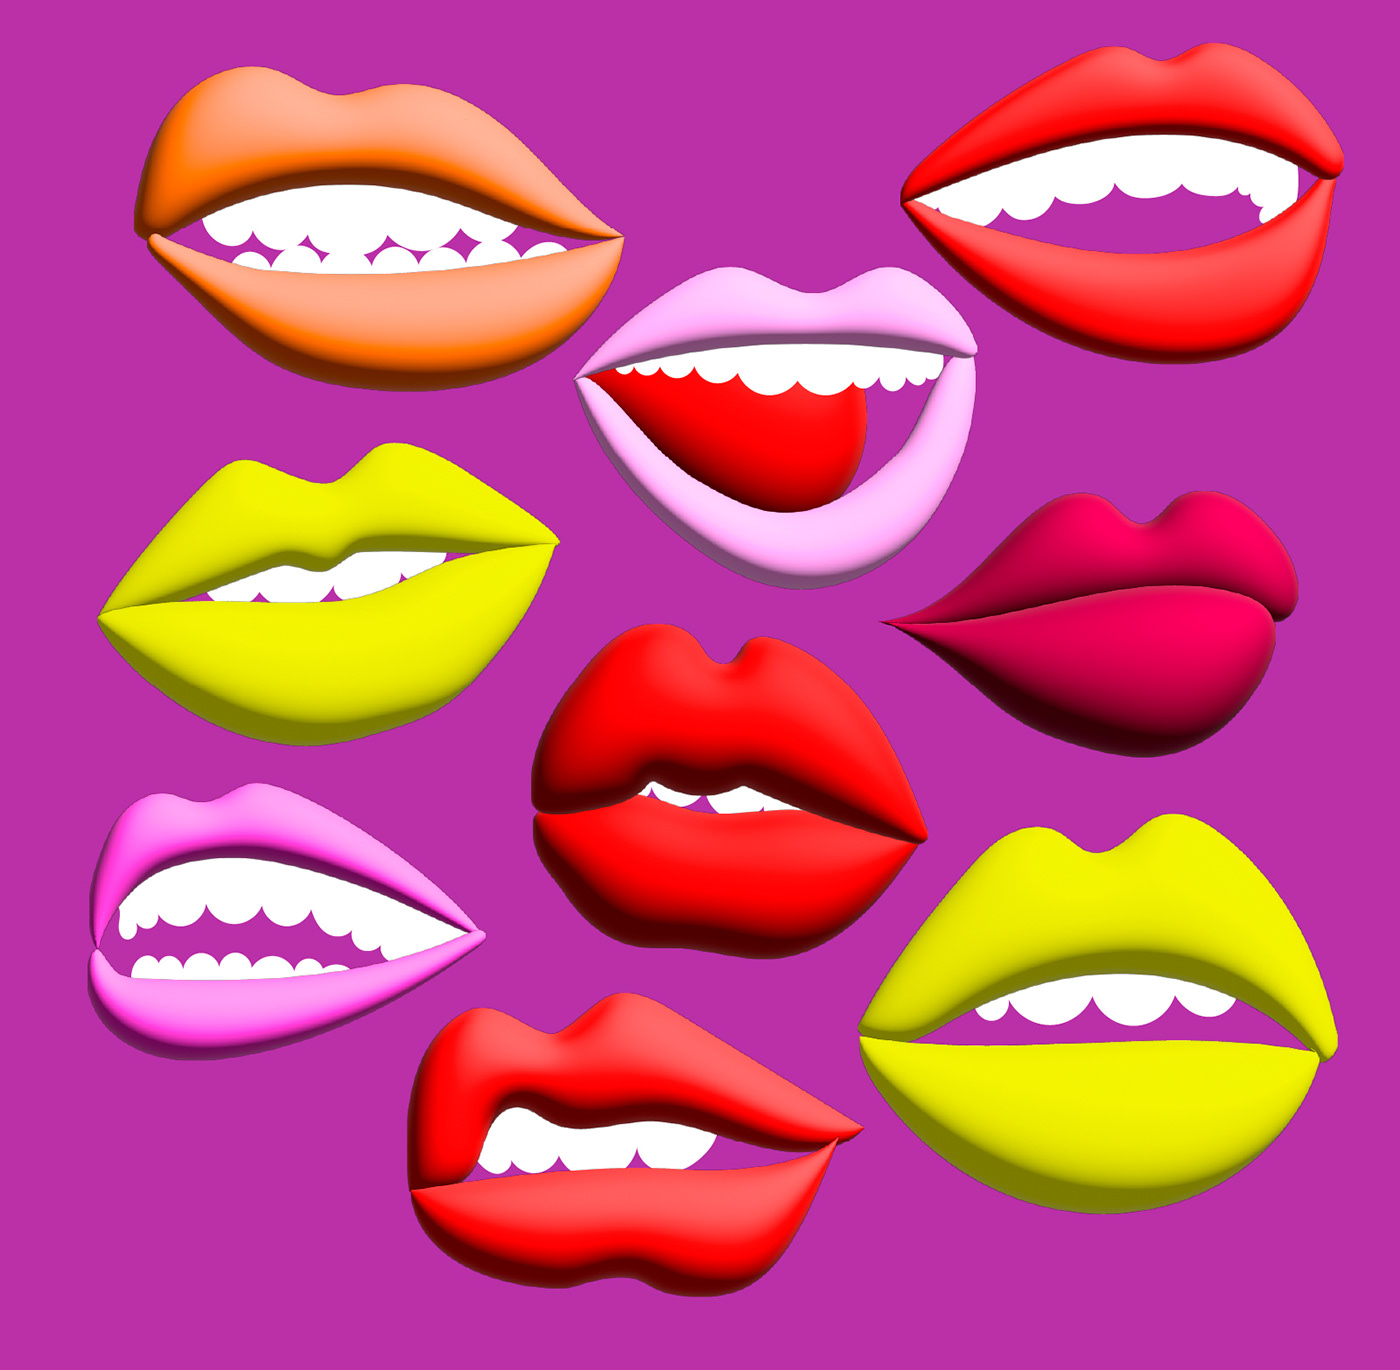 several pairs of lips showing different expressions